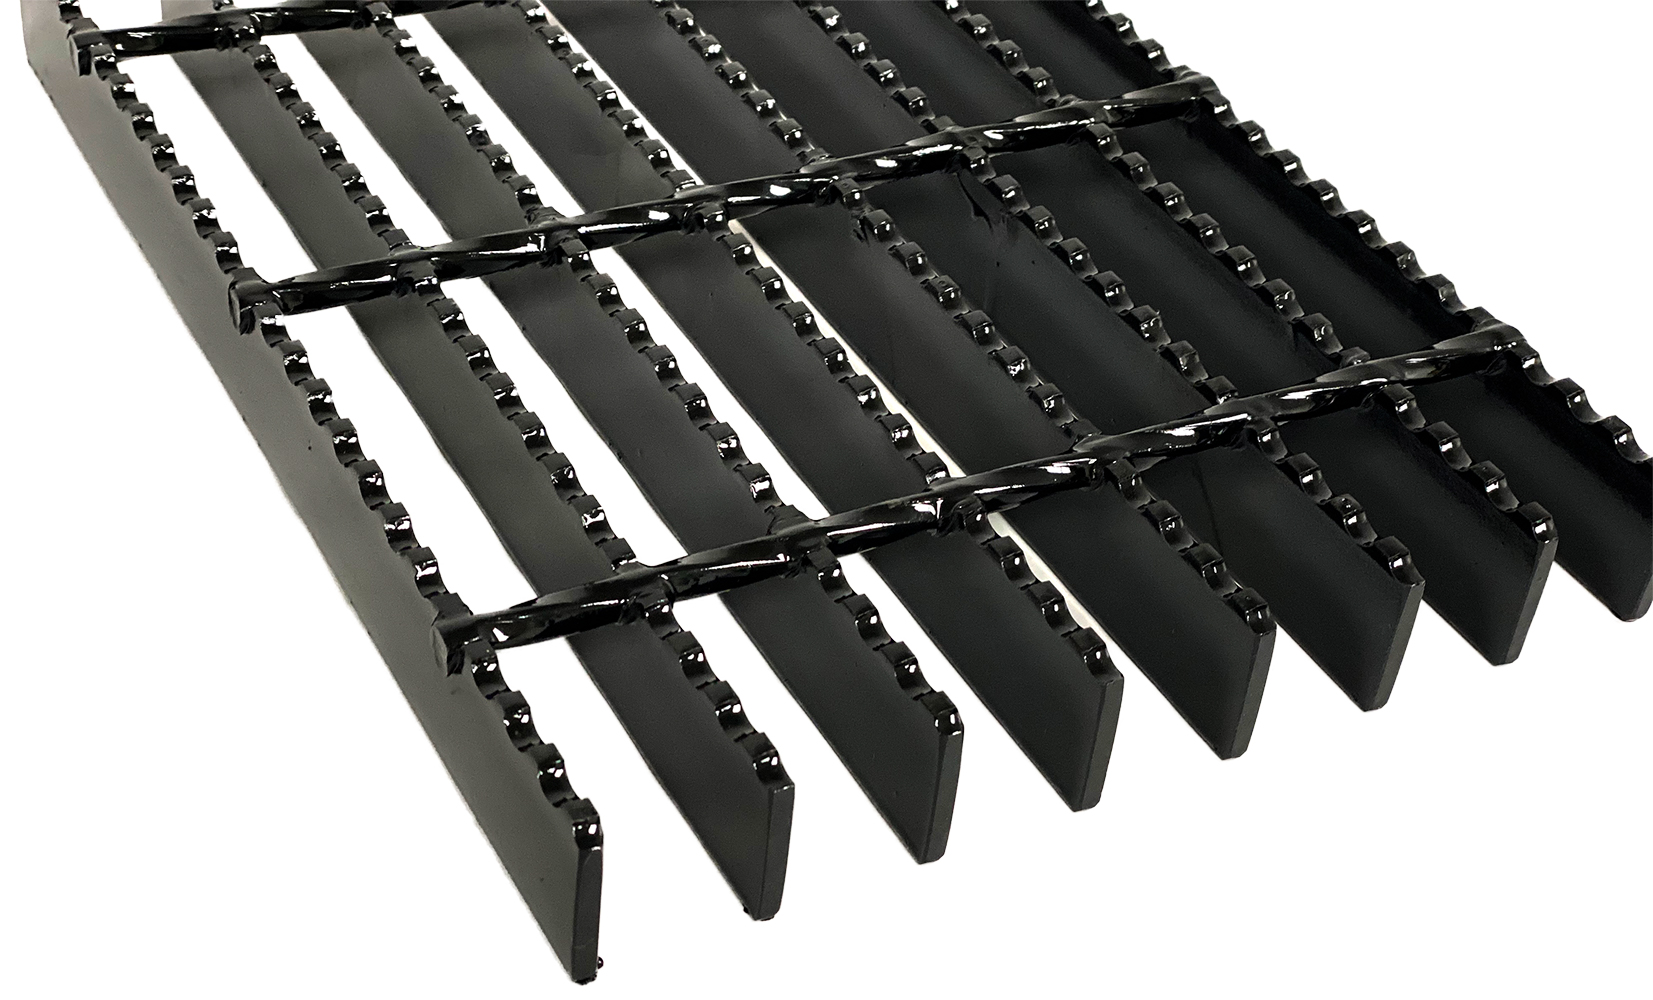 Steel Grating and Checkered Plate Composed Bar Grating